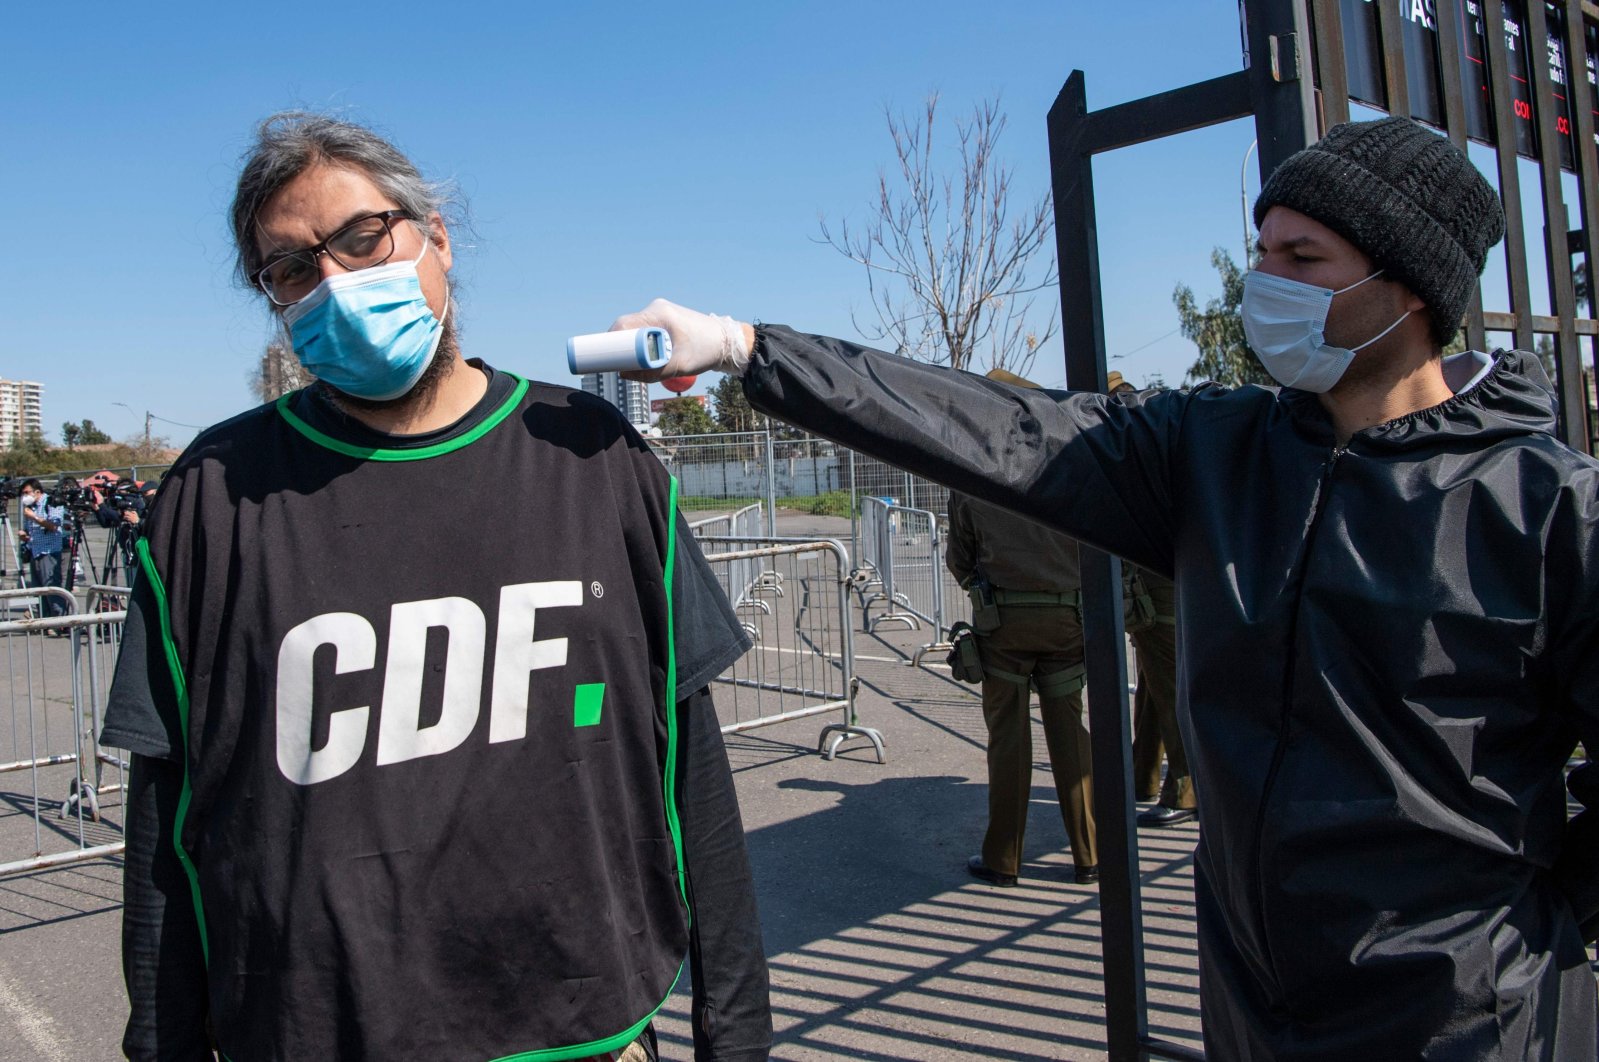 A journalist gets his temperature checked at the gates of Monumental stadium before the start of a football match between Colo-Colo and the Wanderers for the national championship during the COVID-19 pandemic in Santiago, Chile, Aug. 29, 2020. (AFP Photo)